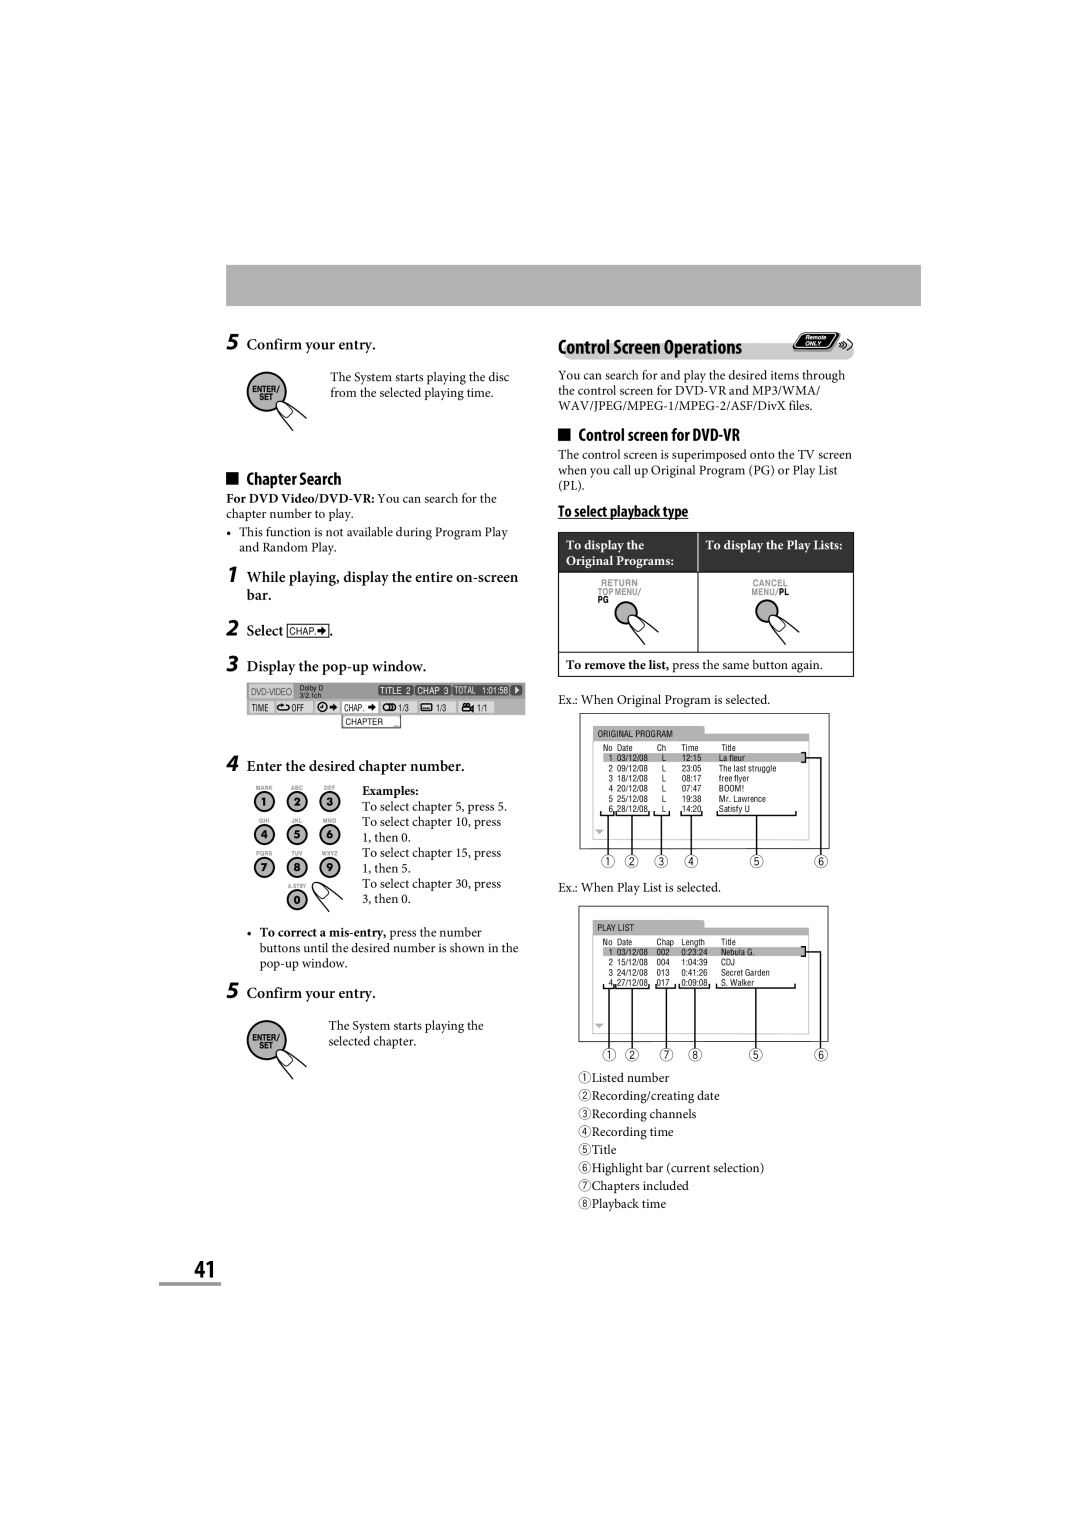 JVC CA-NXG9 manual Control Screen Operations, Chapter Search, Control screen for DVD-VR, To select playback type 